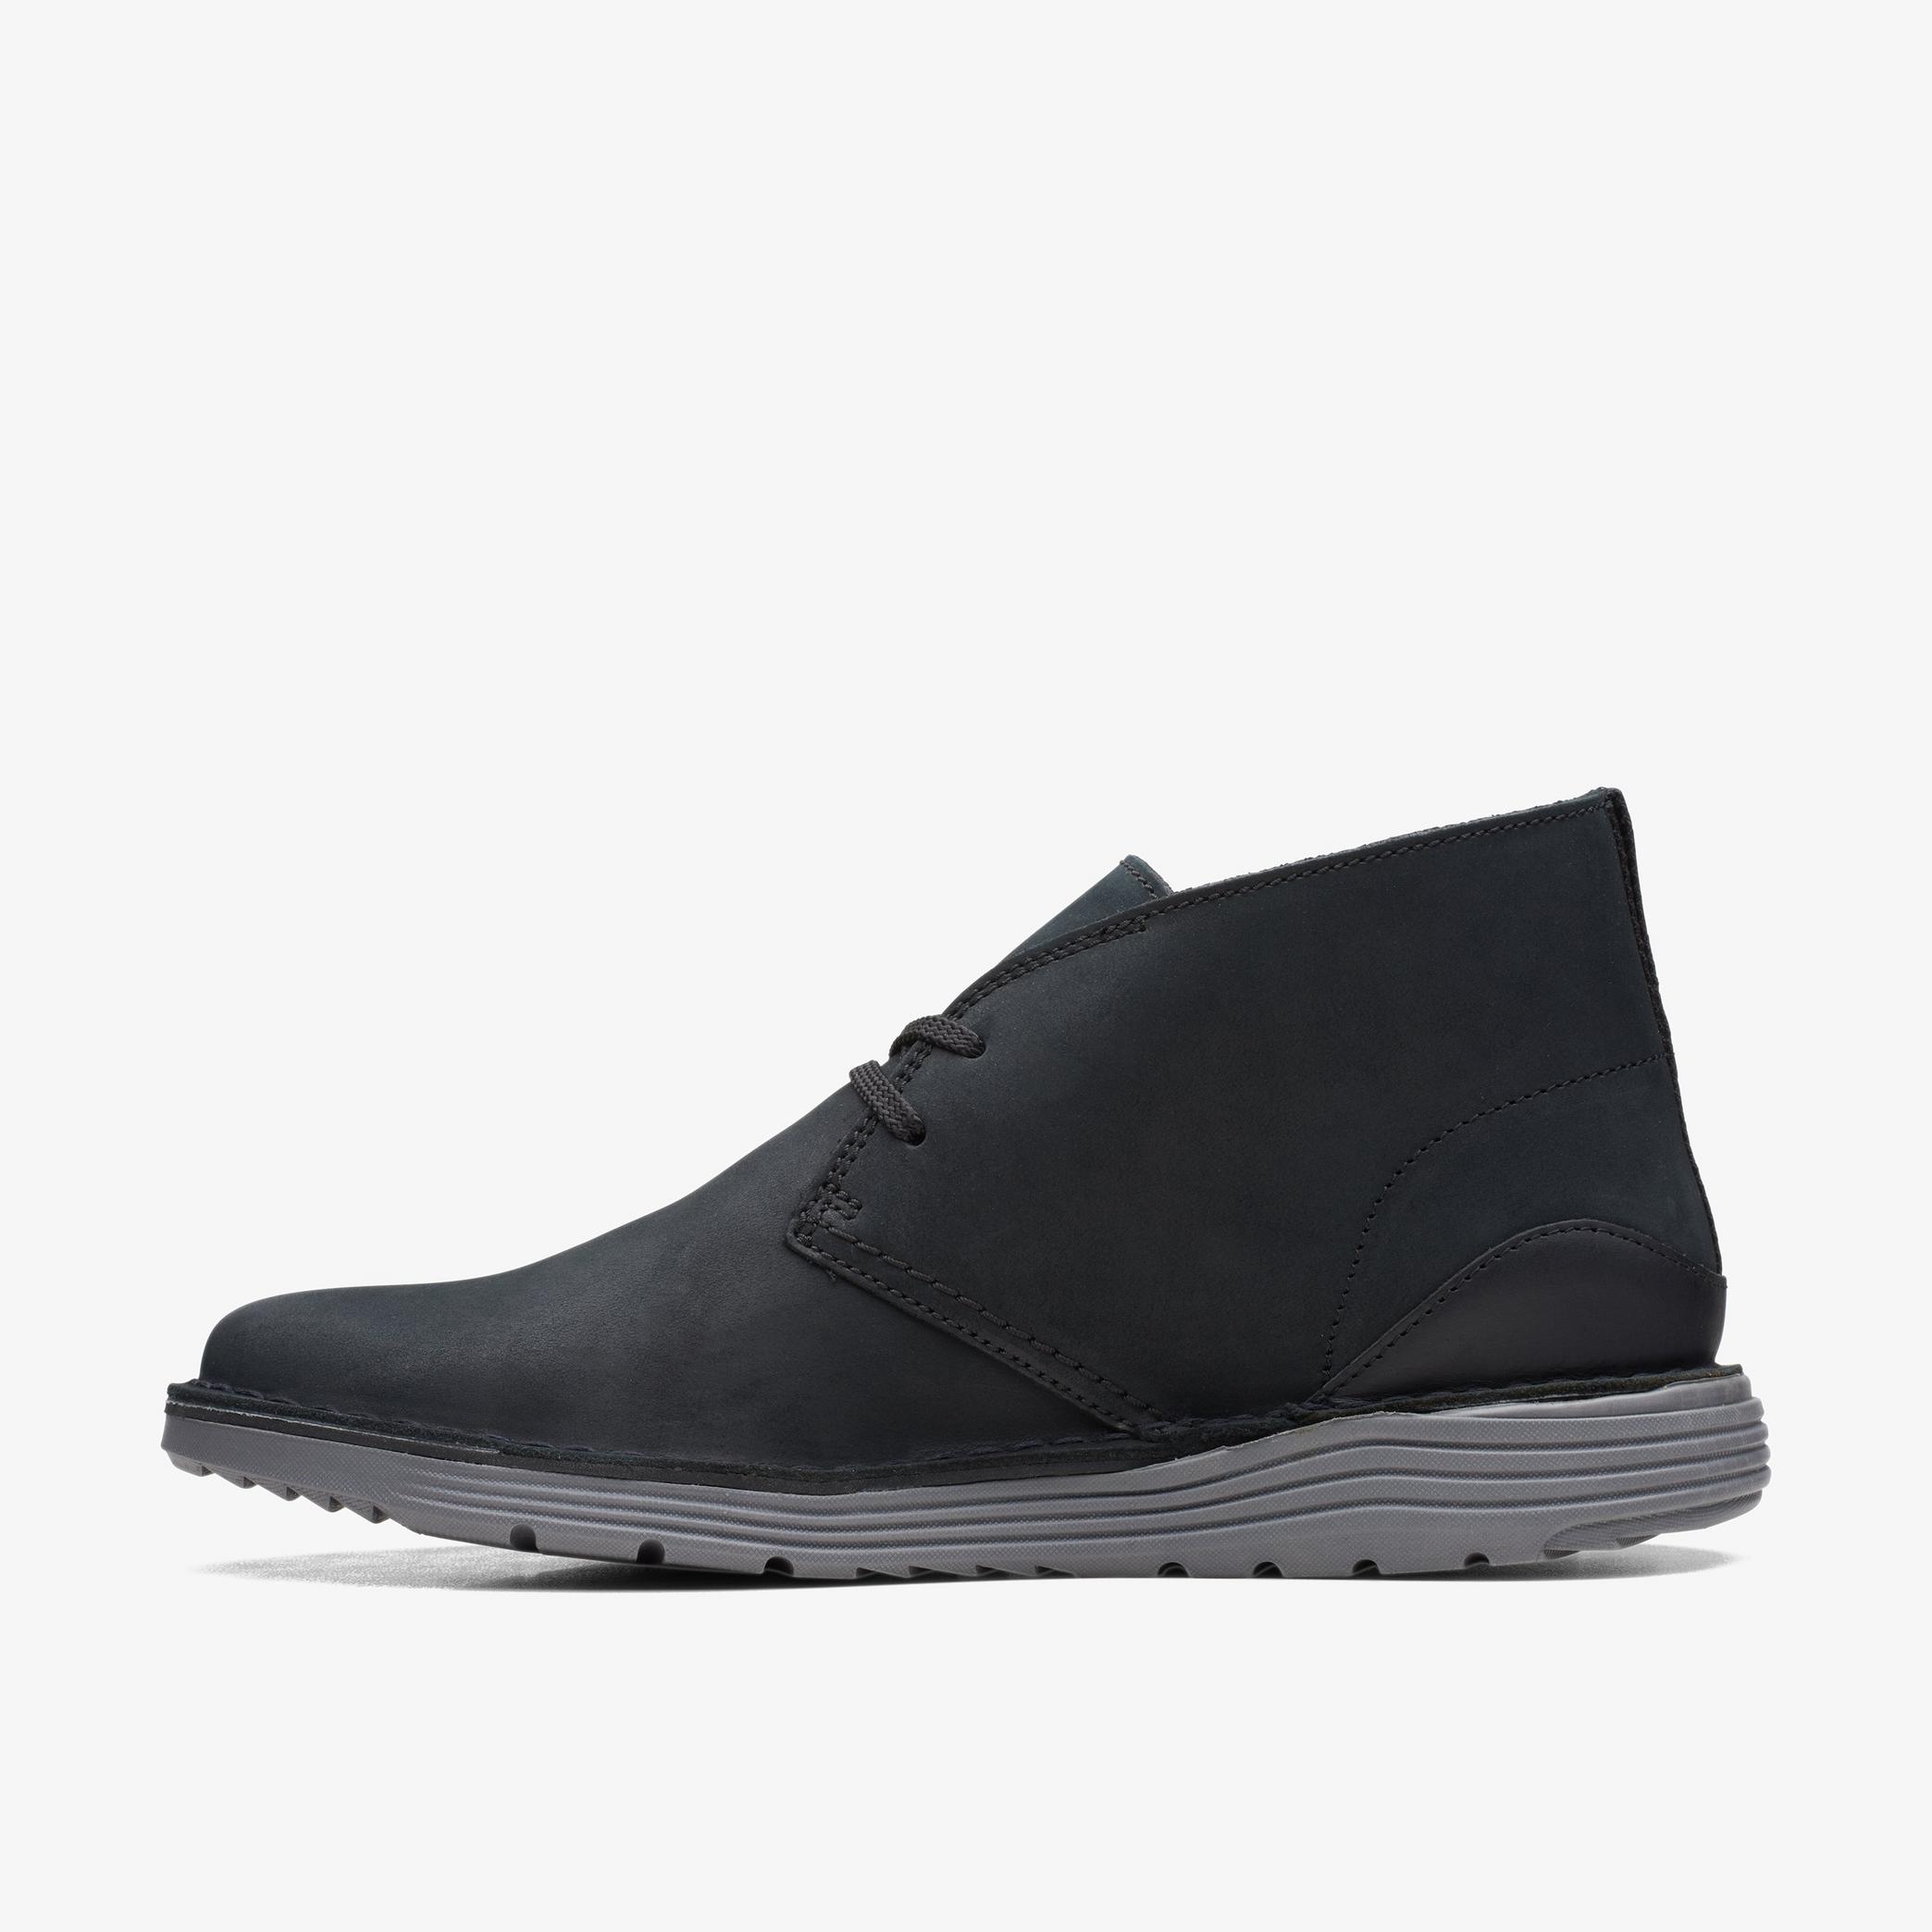 Brahnz Mid Black Nubuck Ankle Boots, view 2 of 6